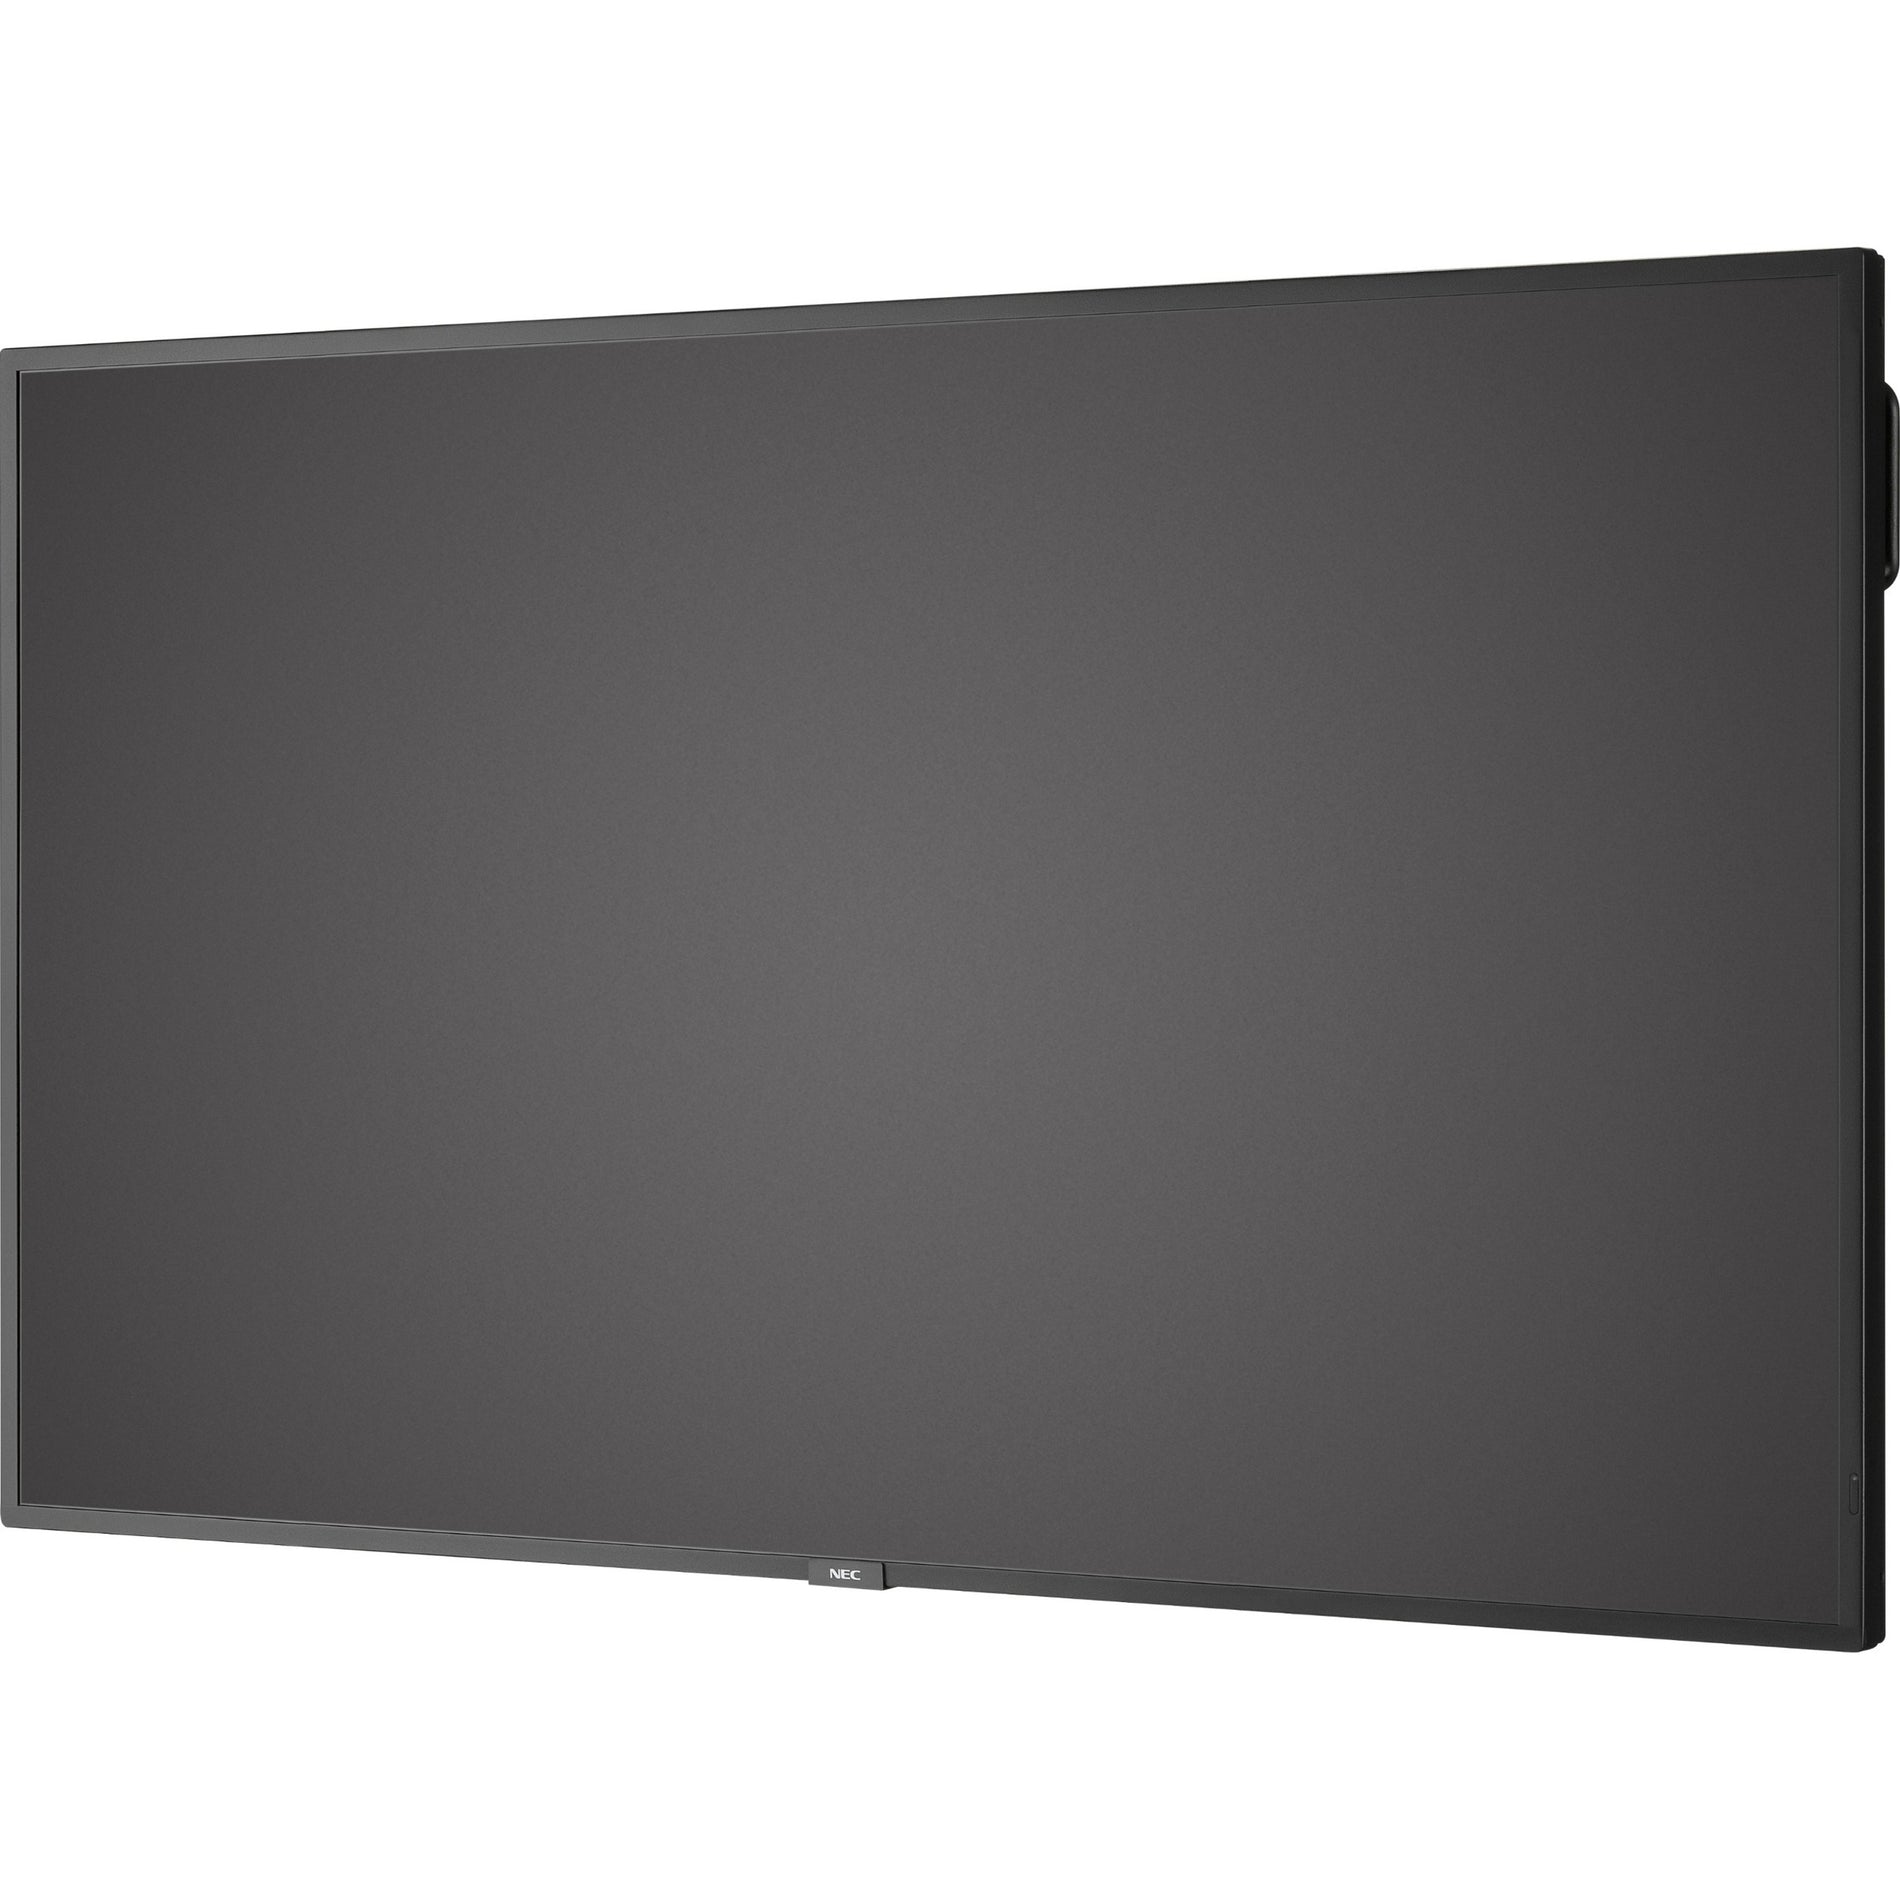 NEC Display 43" Ultra High Definition Commercial Display (ME431) Alternate-Image5 image